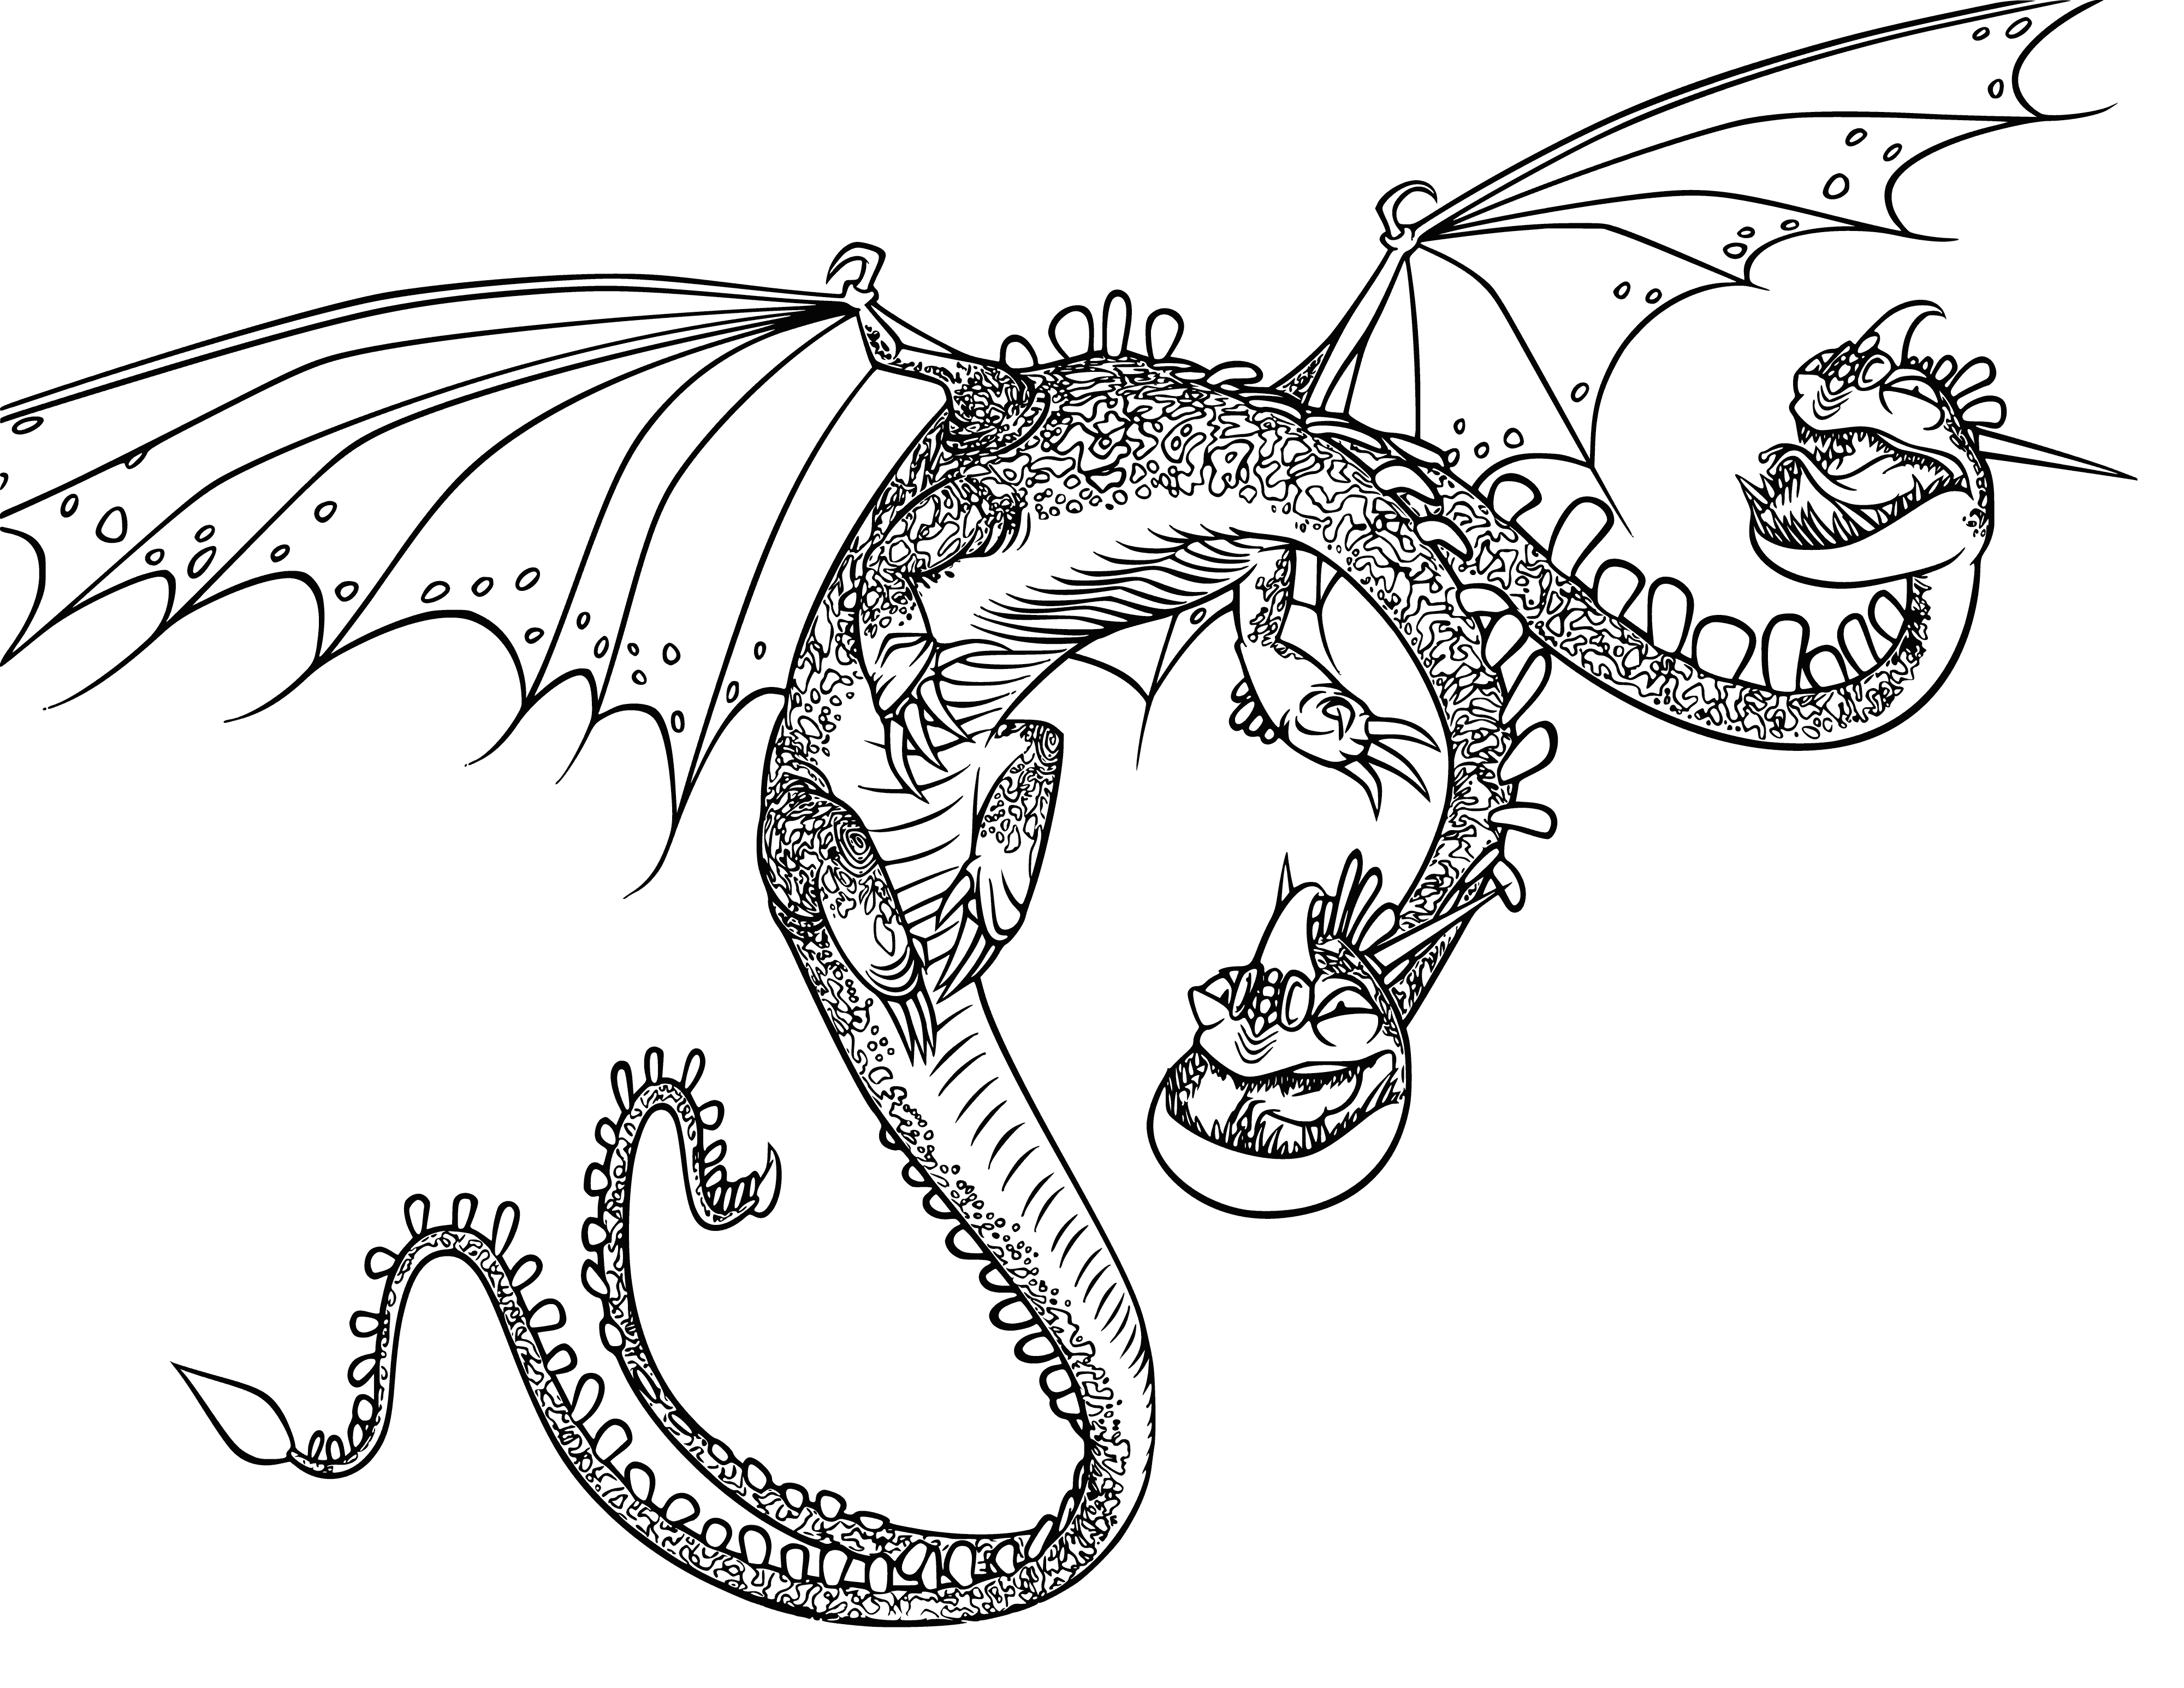 coloring page: Boy stands before dragon, petting its nose. He looks happy & excited.